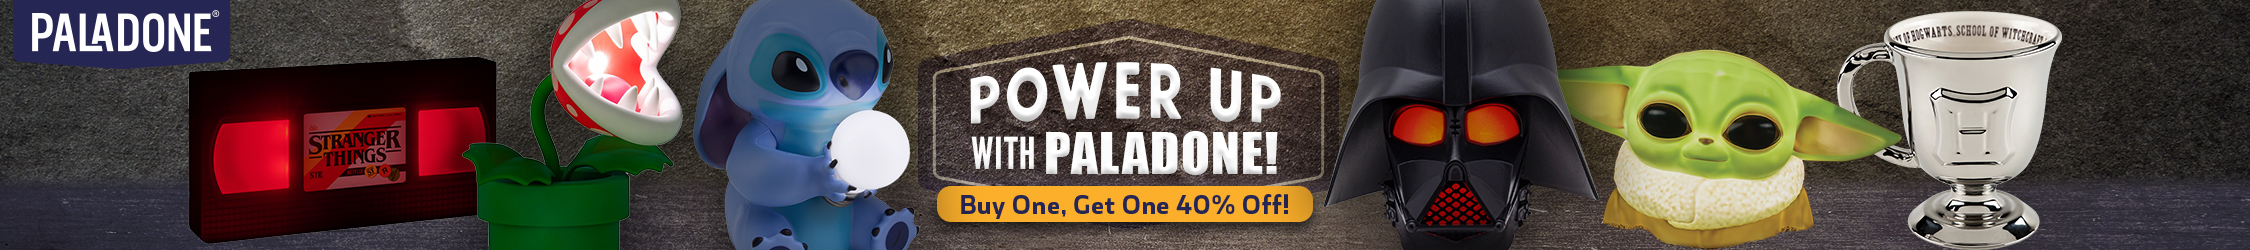 Buy One, Get One 40% Off on Paladone